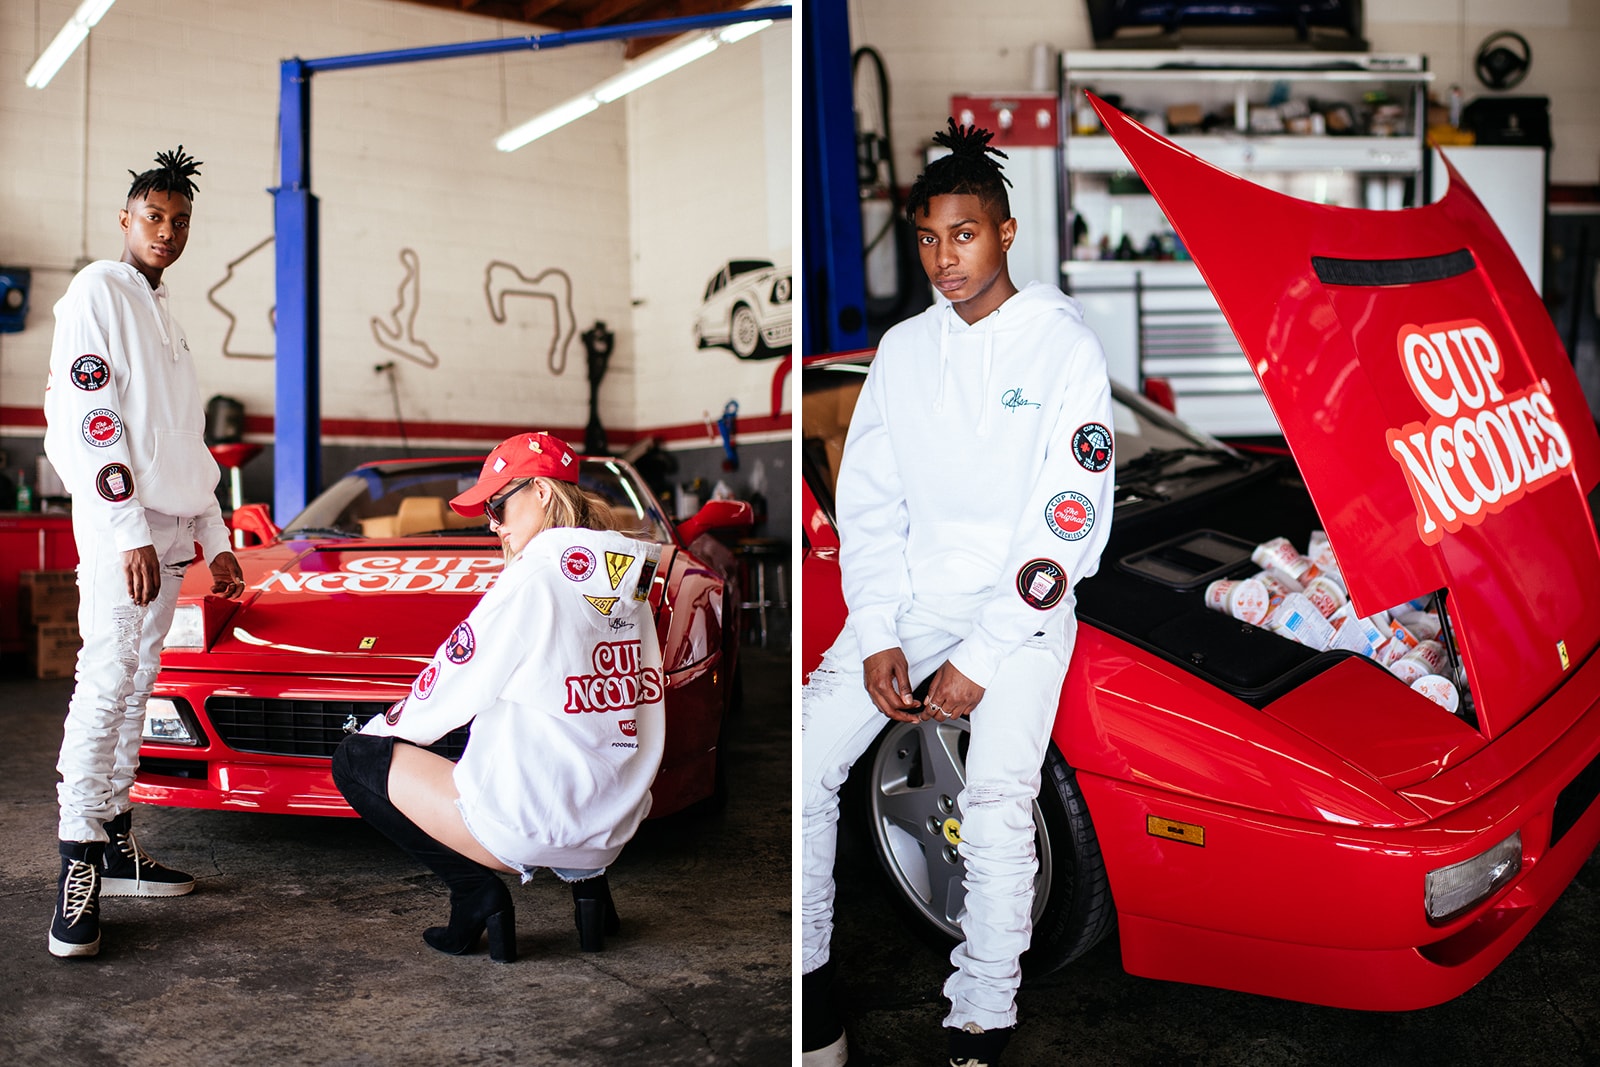 Young and Reckless Nissin Cup Noodles capsule collection custom ferrari red white